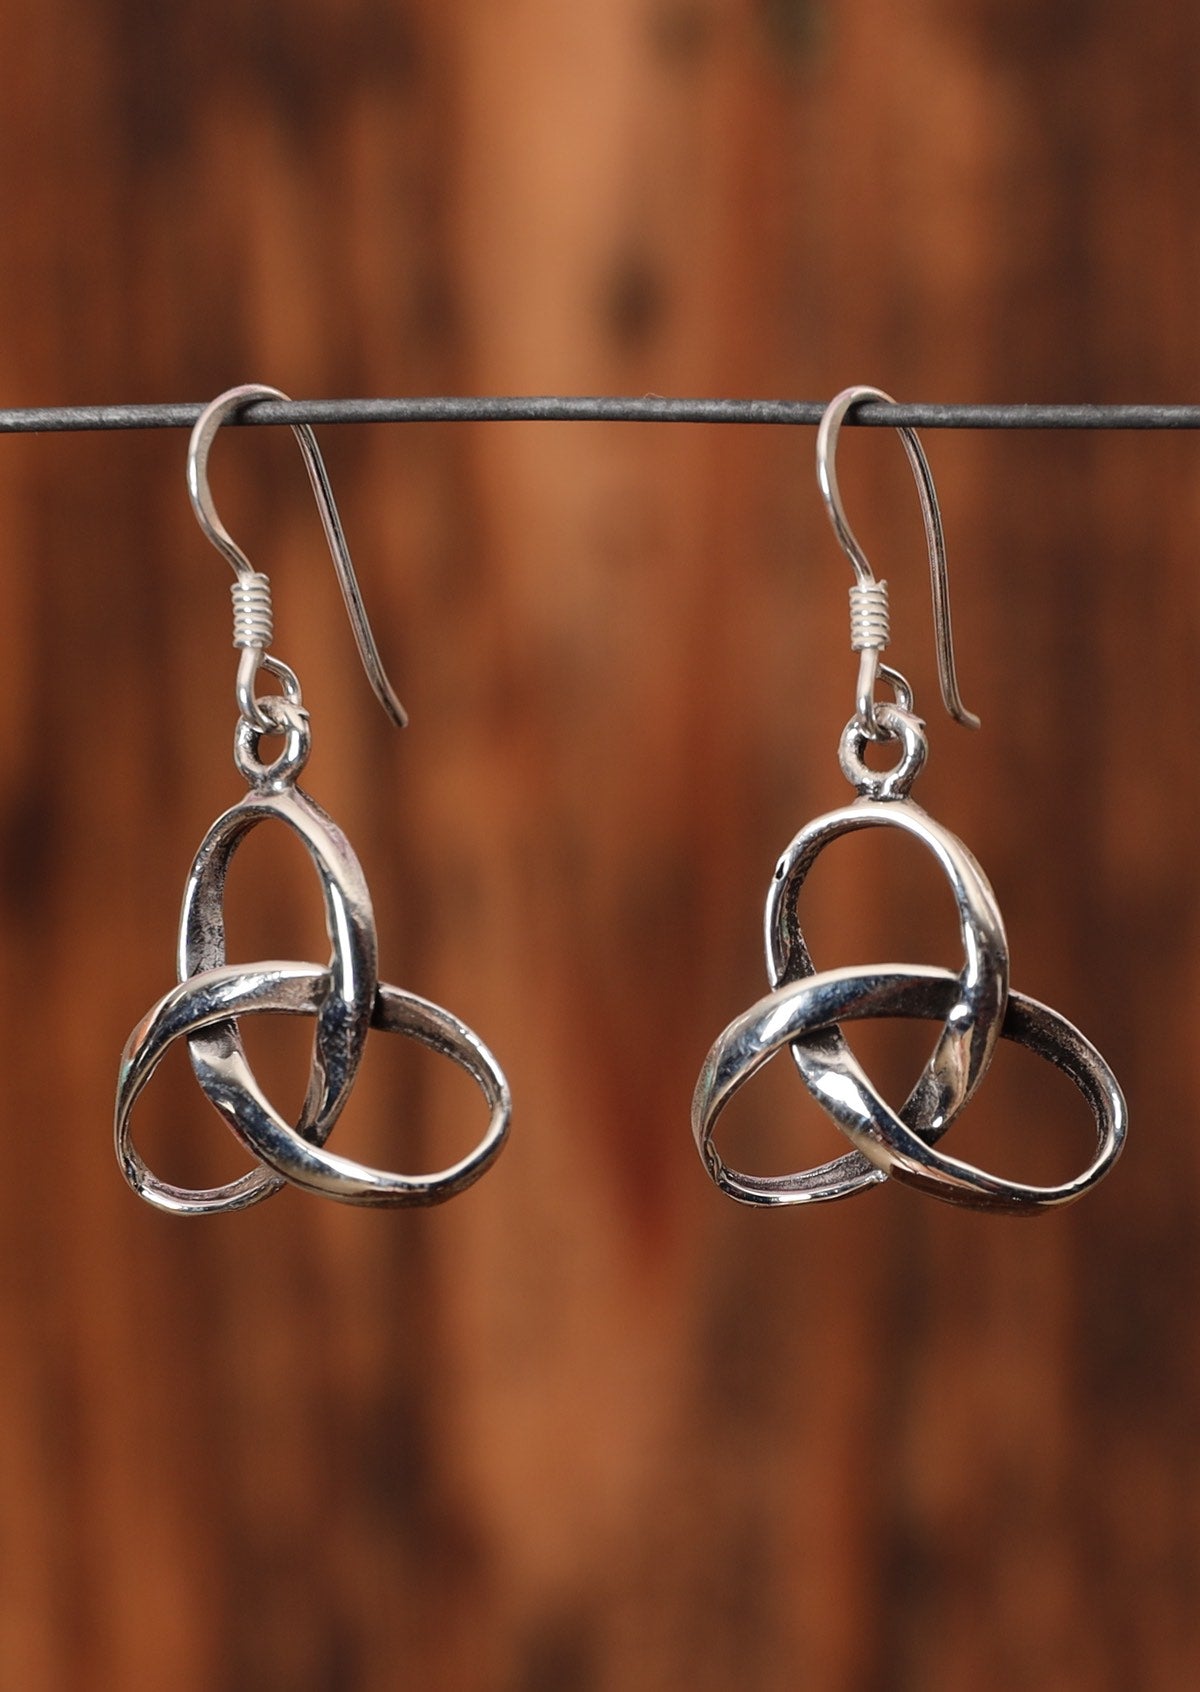 92.5% silver continuous knot earrings hanging on a wire for display.